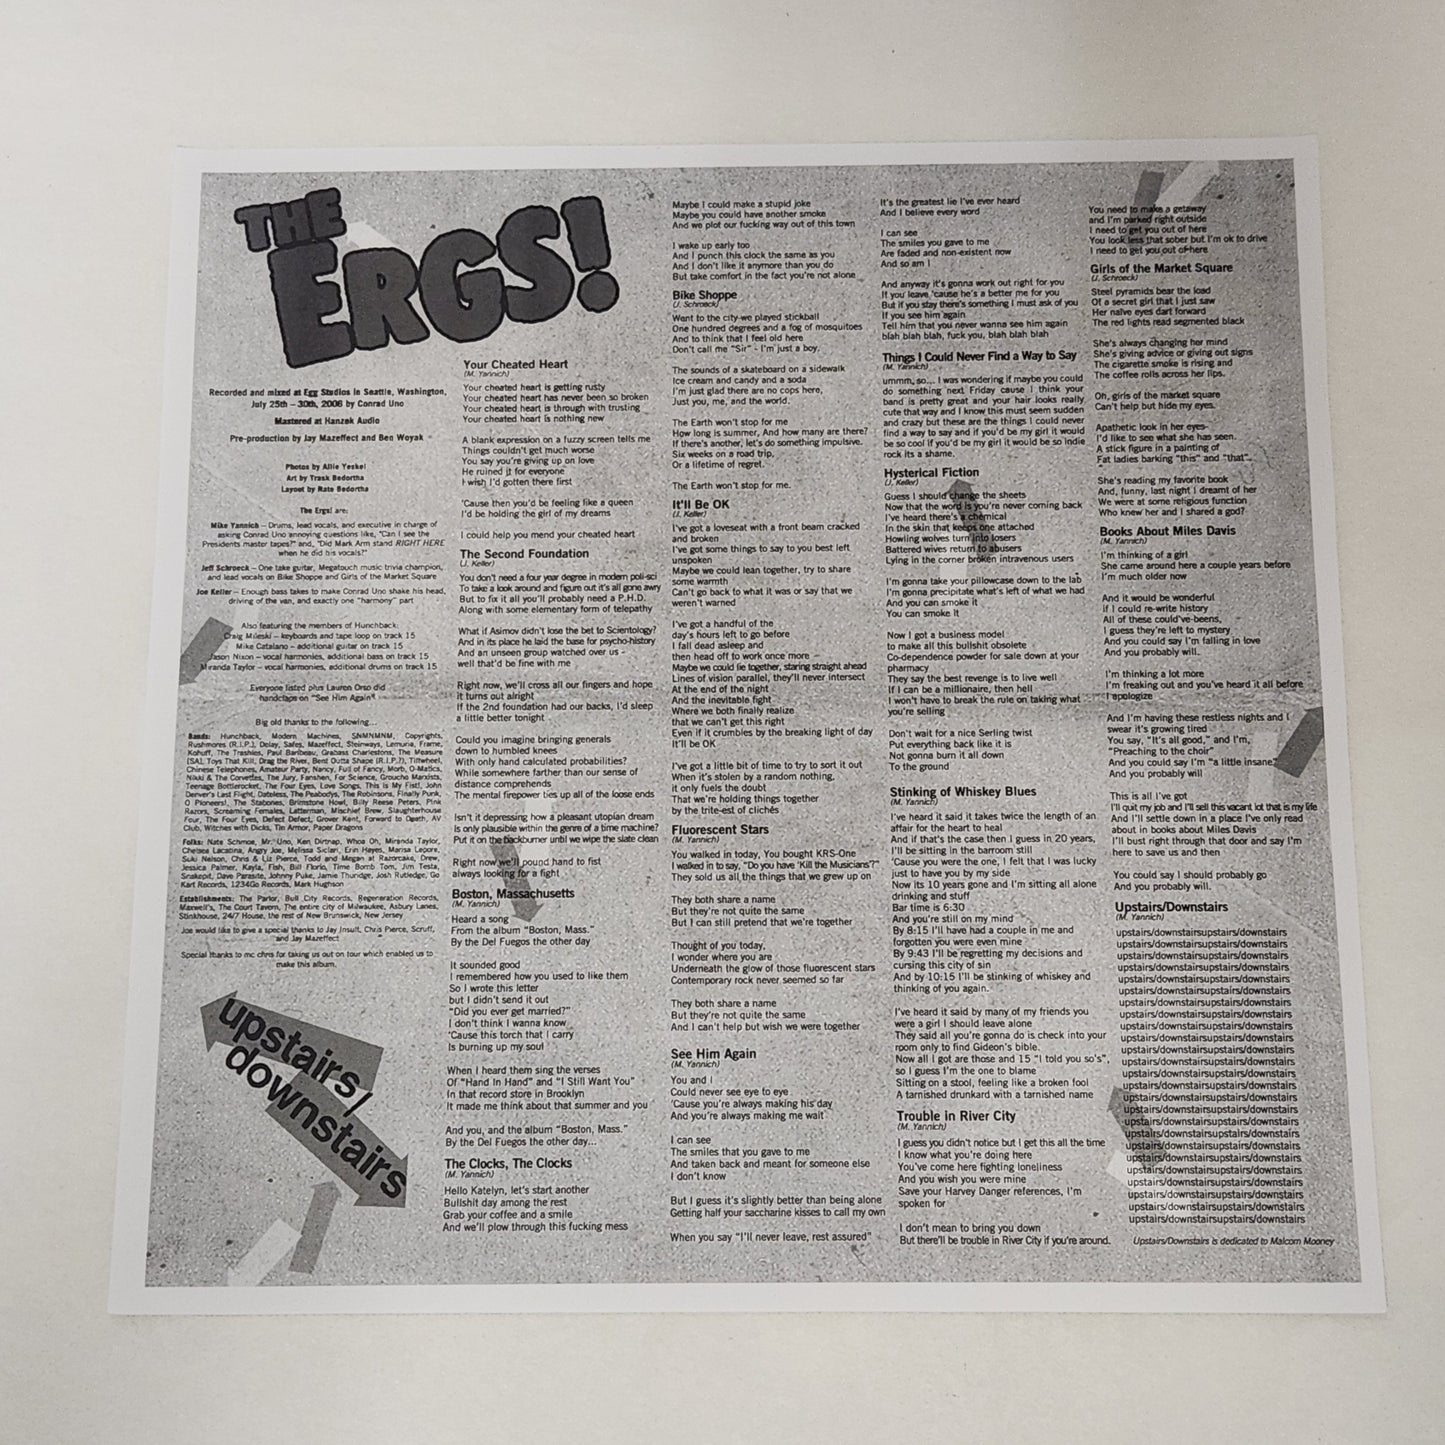 The Ergs! "Upstairs / Downstairs" 2007 Punk Record Album